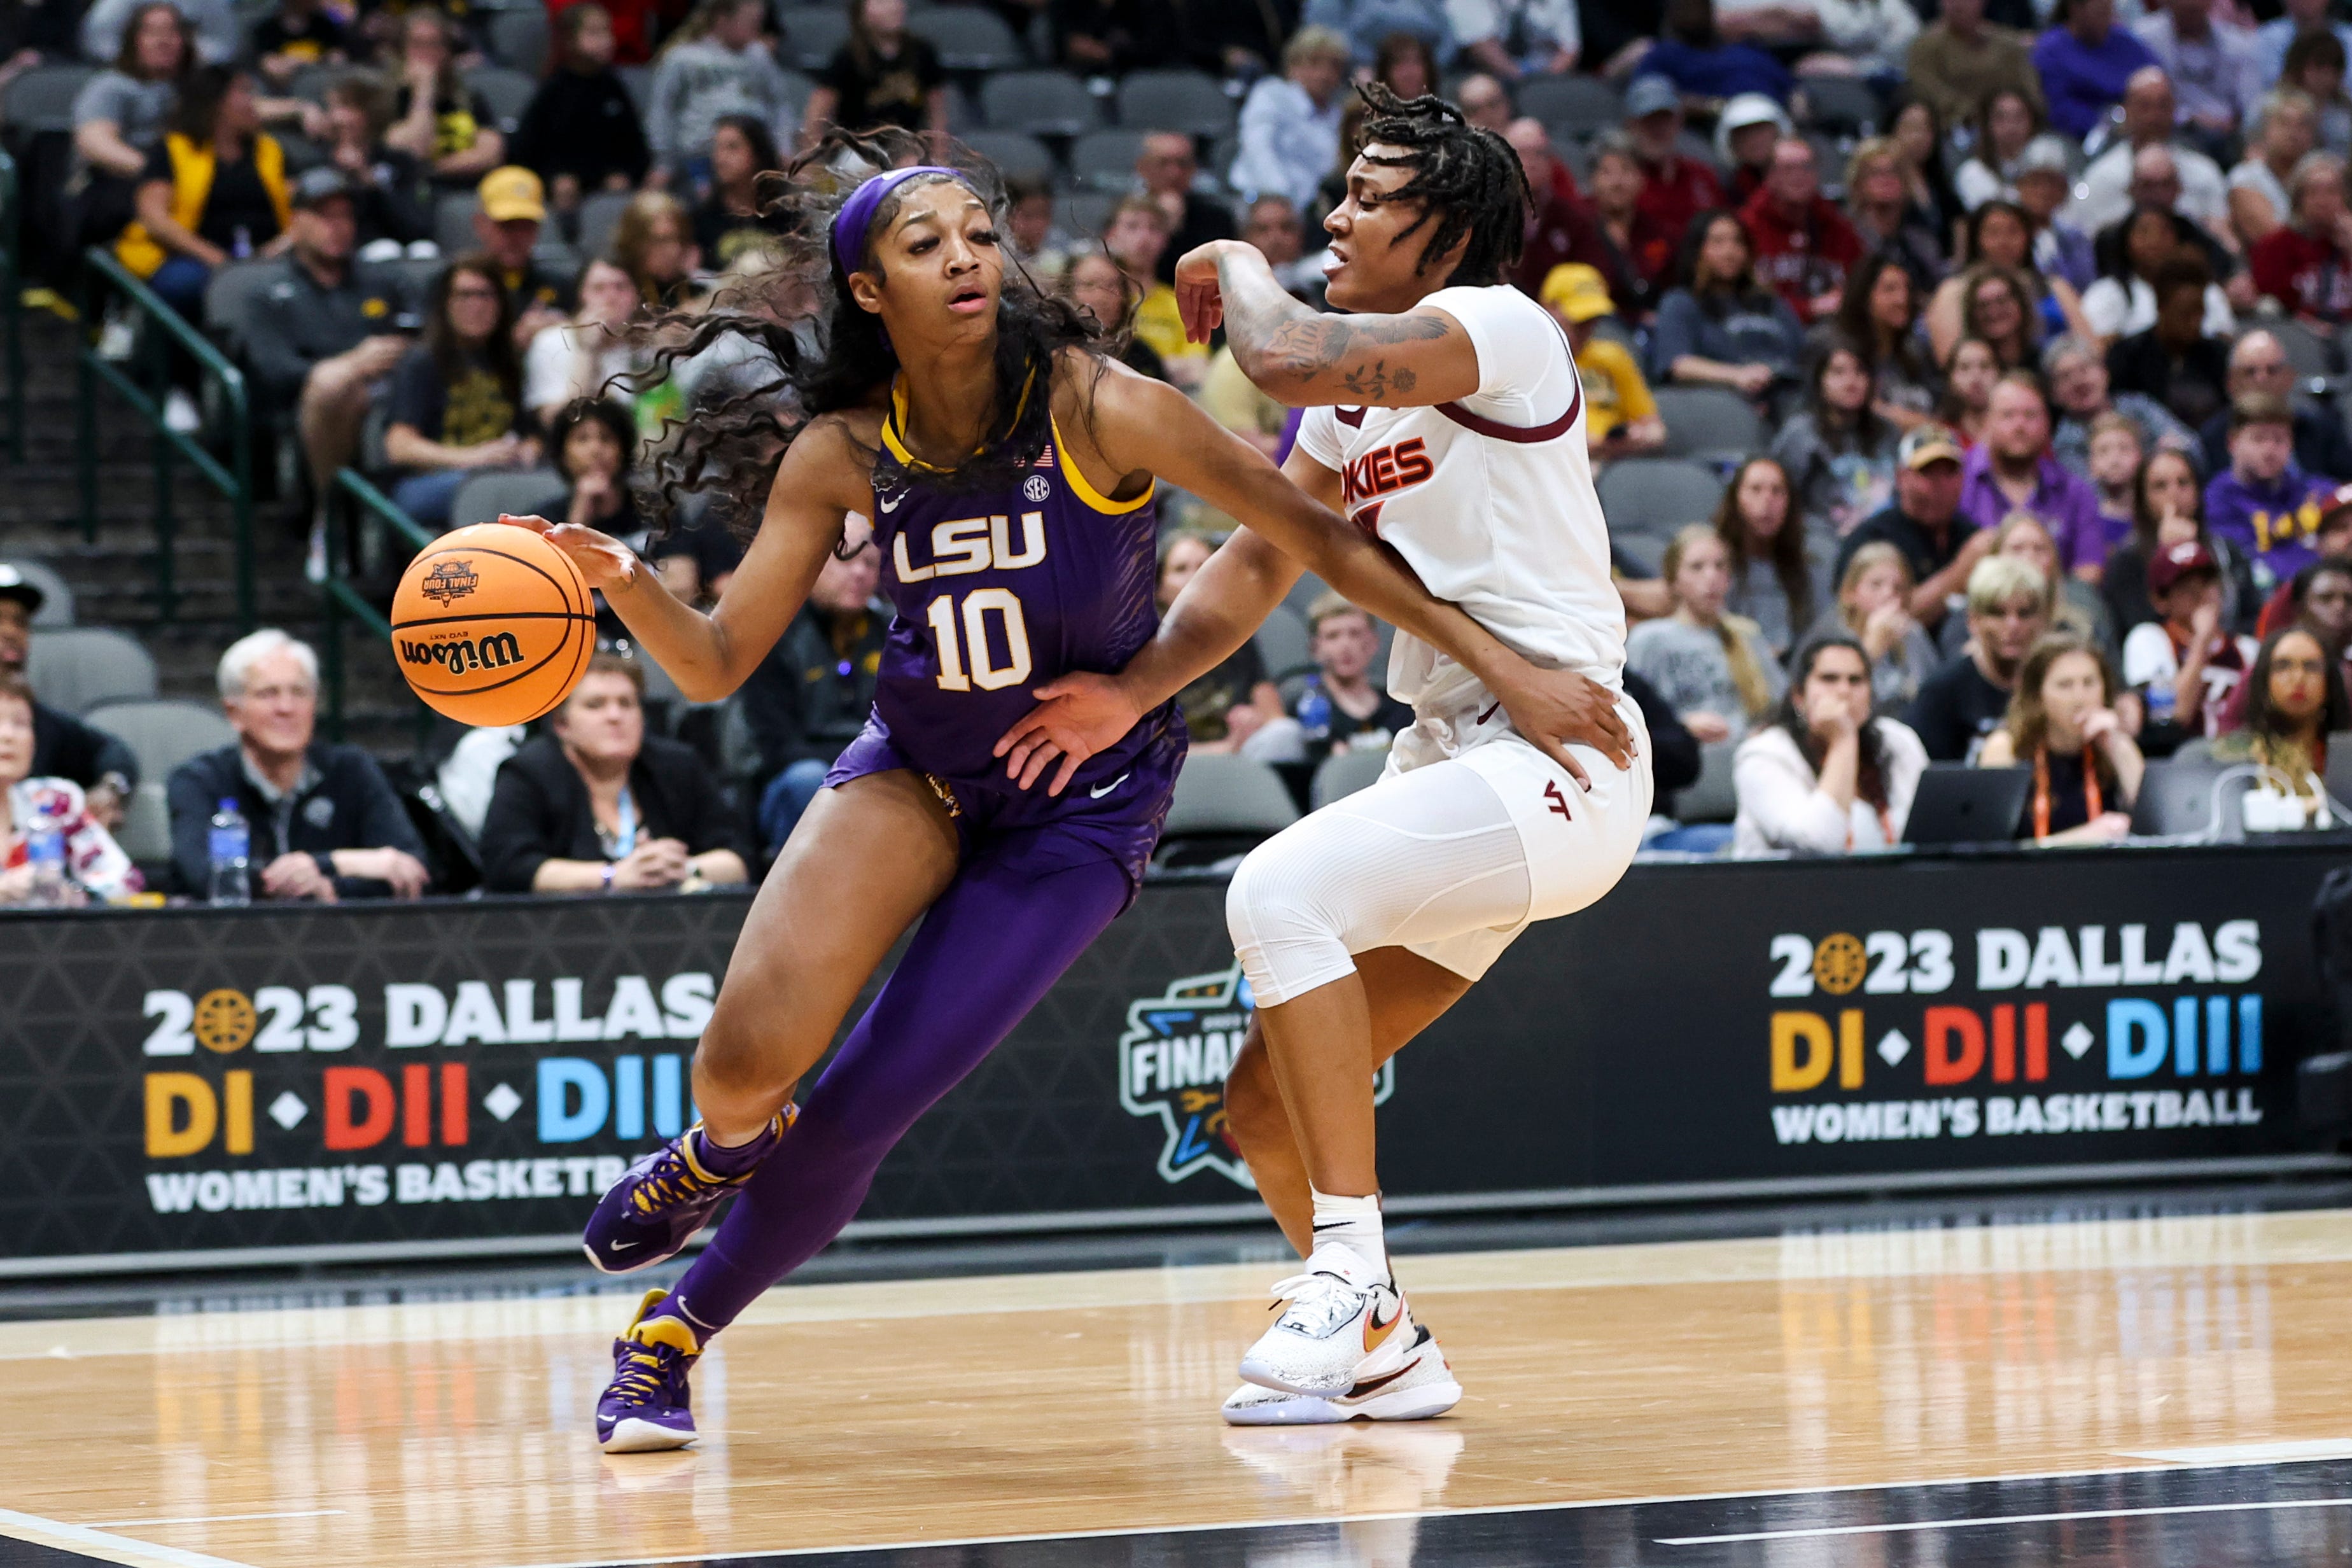 Mar 31, 2023; Dallas, TX, USA; LSU Lady Tigers forward Angel Reese (10) drives to the basket against Virginia Tech Hokies forward Taylor Soule (13) in the first half in semifinals of the the women's Final Four of the 2023 NCAA Tournament at American Airlines Center. Mandatory Credit: Kevin Jairaj-USA TODAY Sports